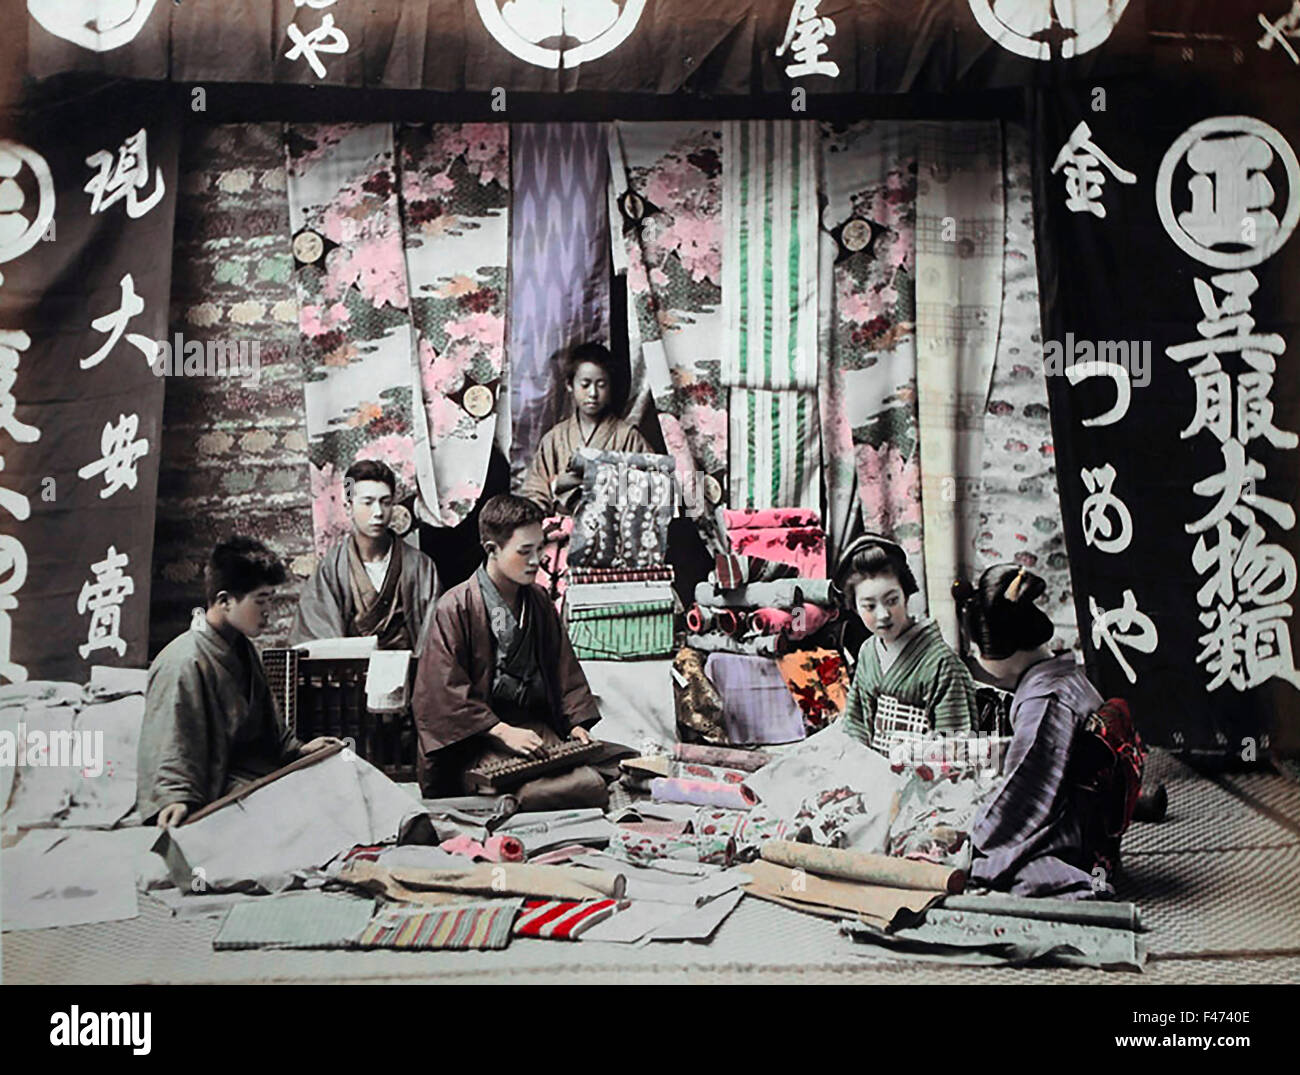 Japanese people working at silk production, Japan Stock Photo